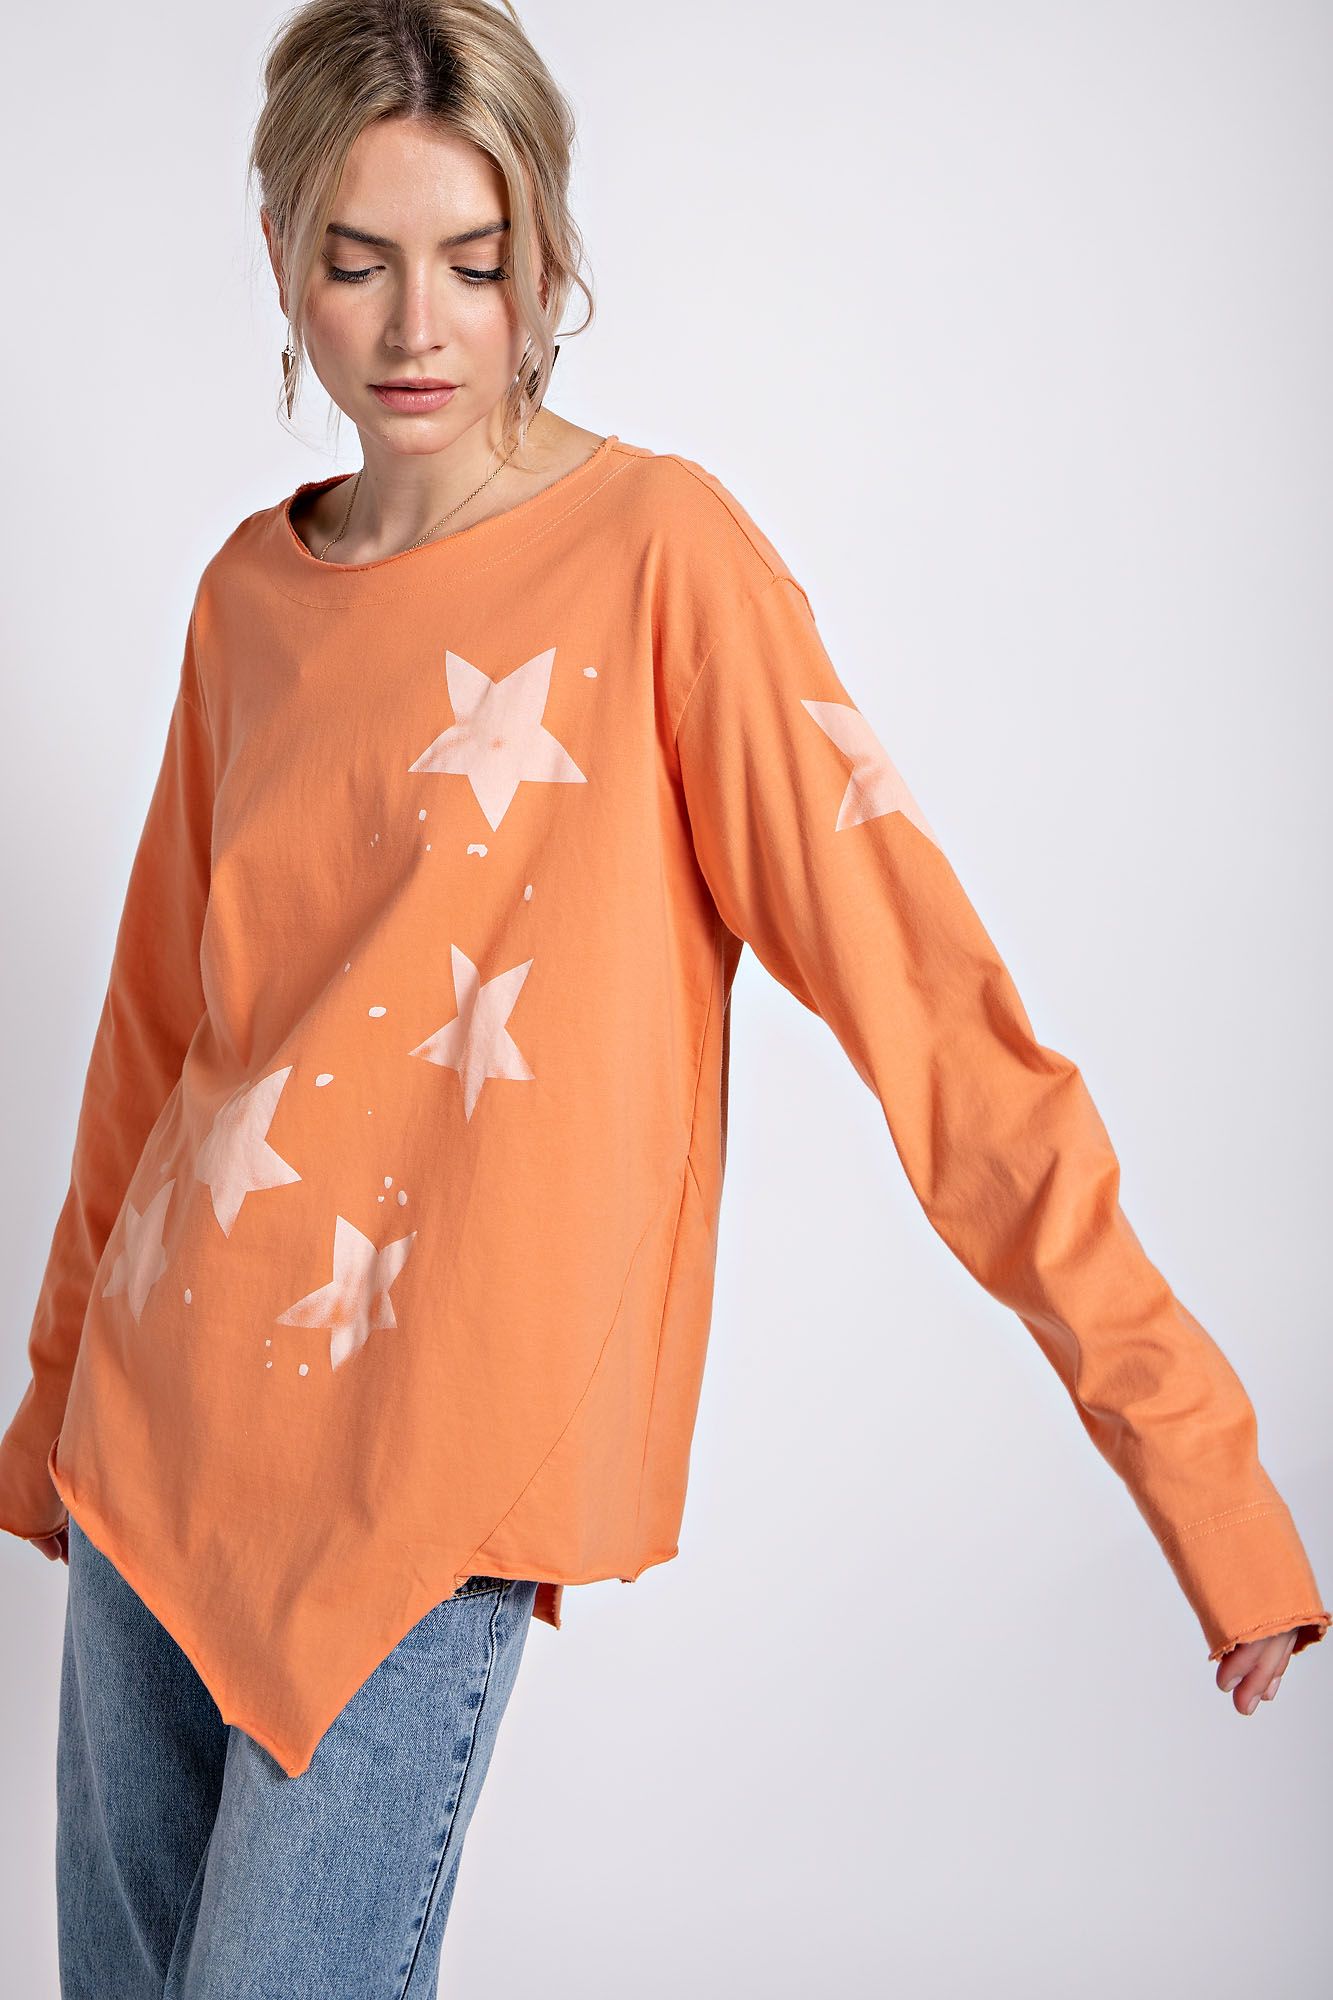 Easel Plus Star Printed Raw Edges Detail Cotton Tops